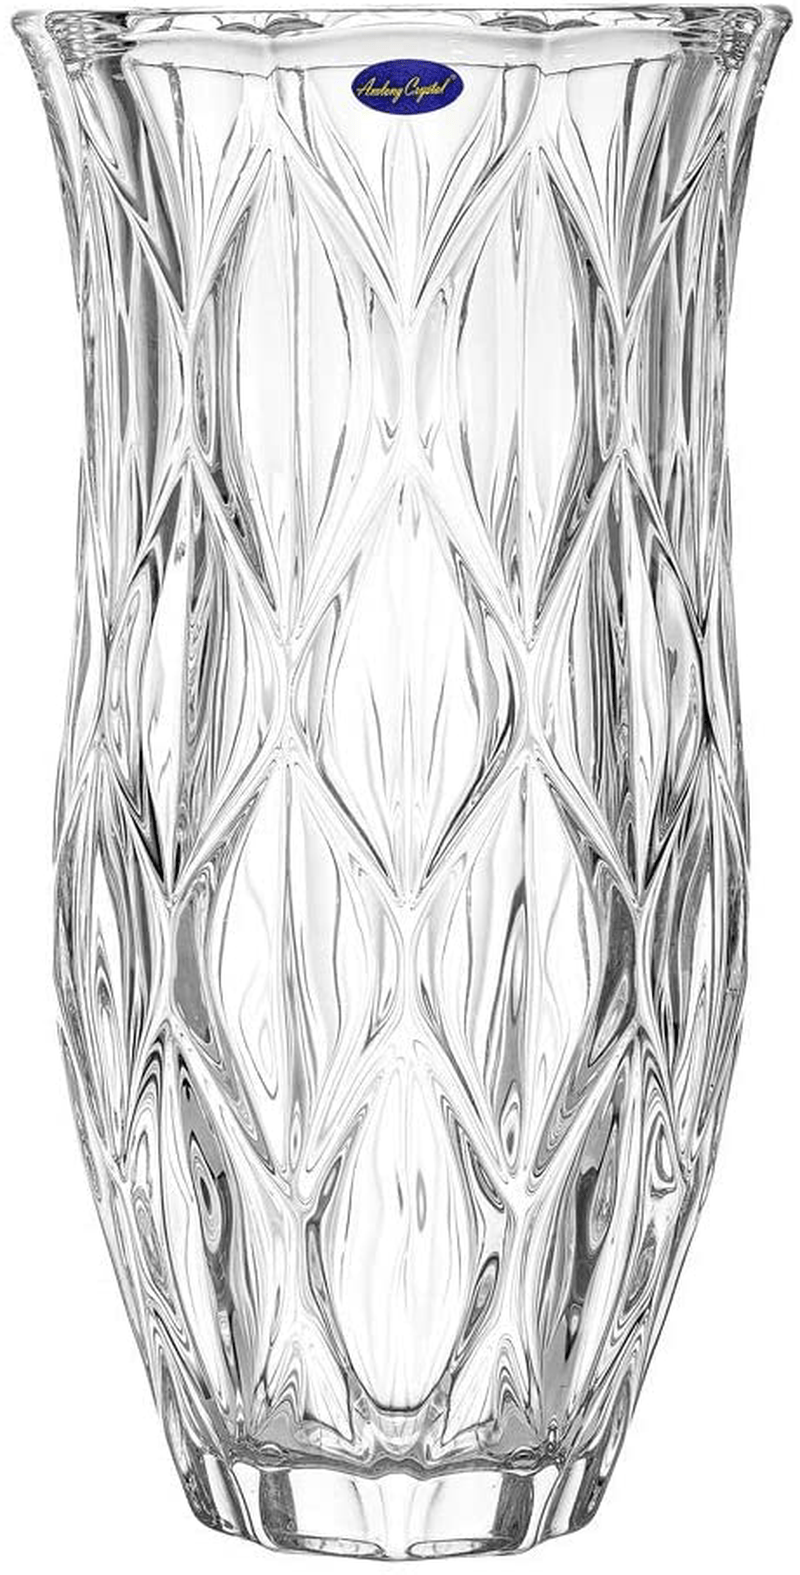 Amlong Crystal Large Size Clear Floral Vase 12 inches High (6 inch Top and 3 inch Bottom) Home & Garden > Decor > Vases Amlong Crystal Floral-Med  